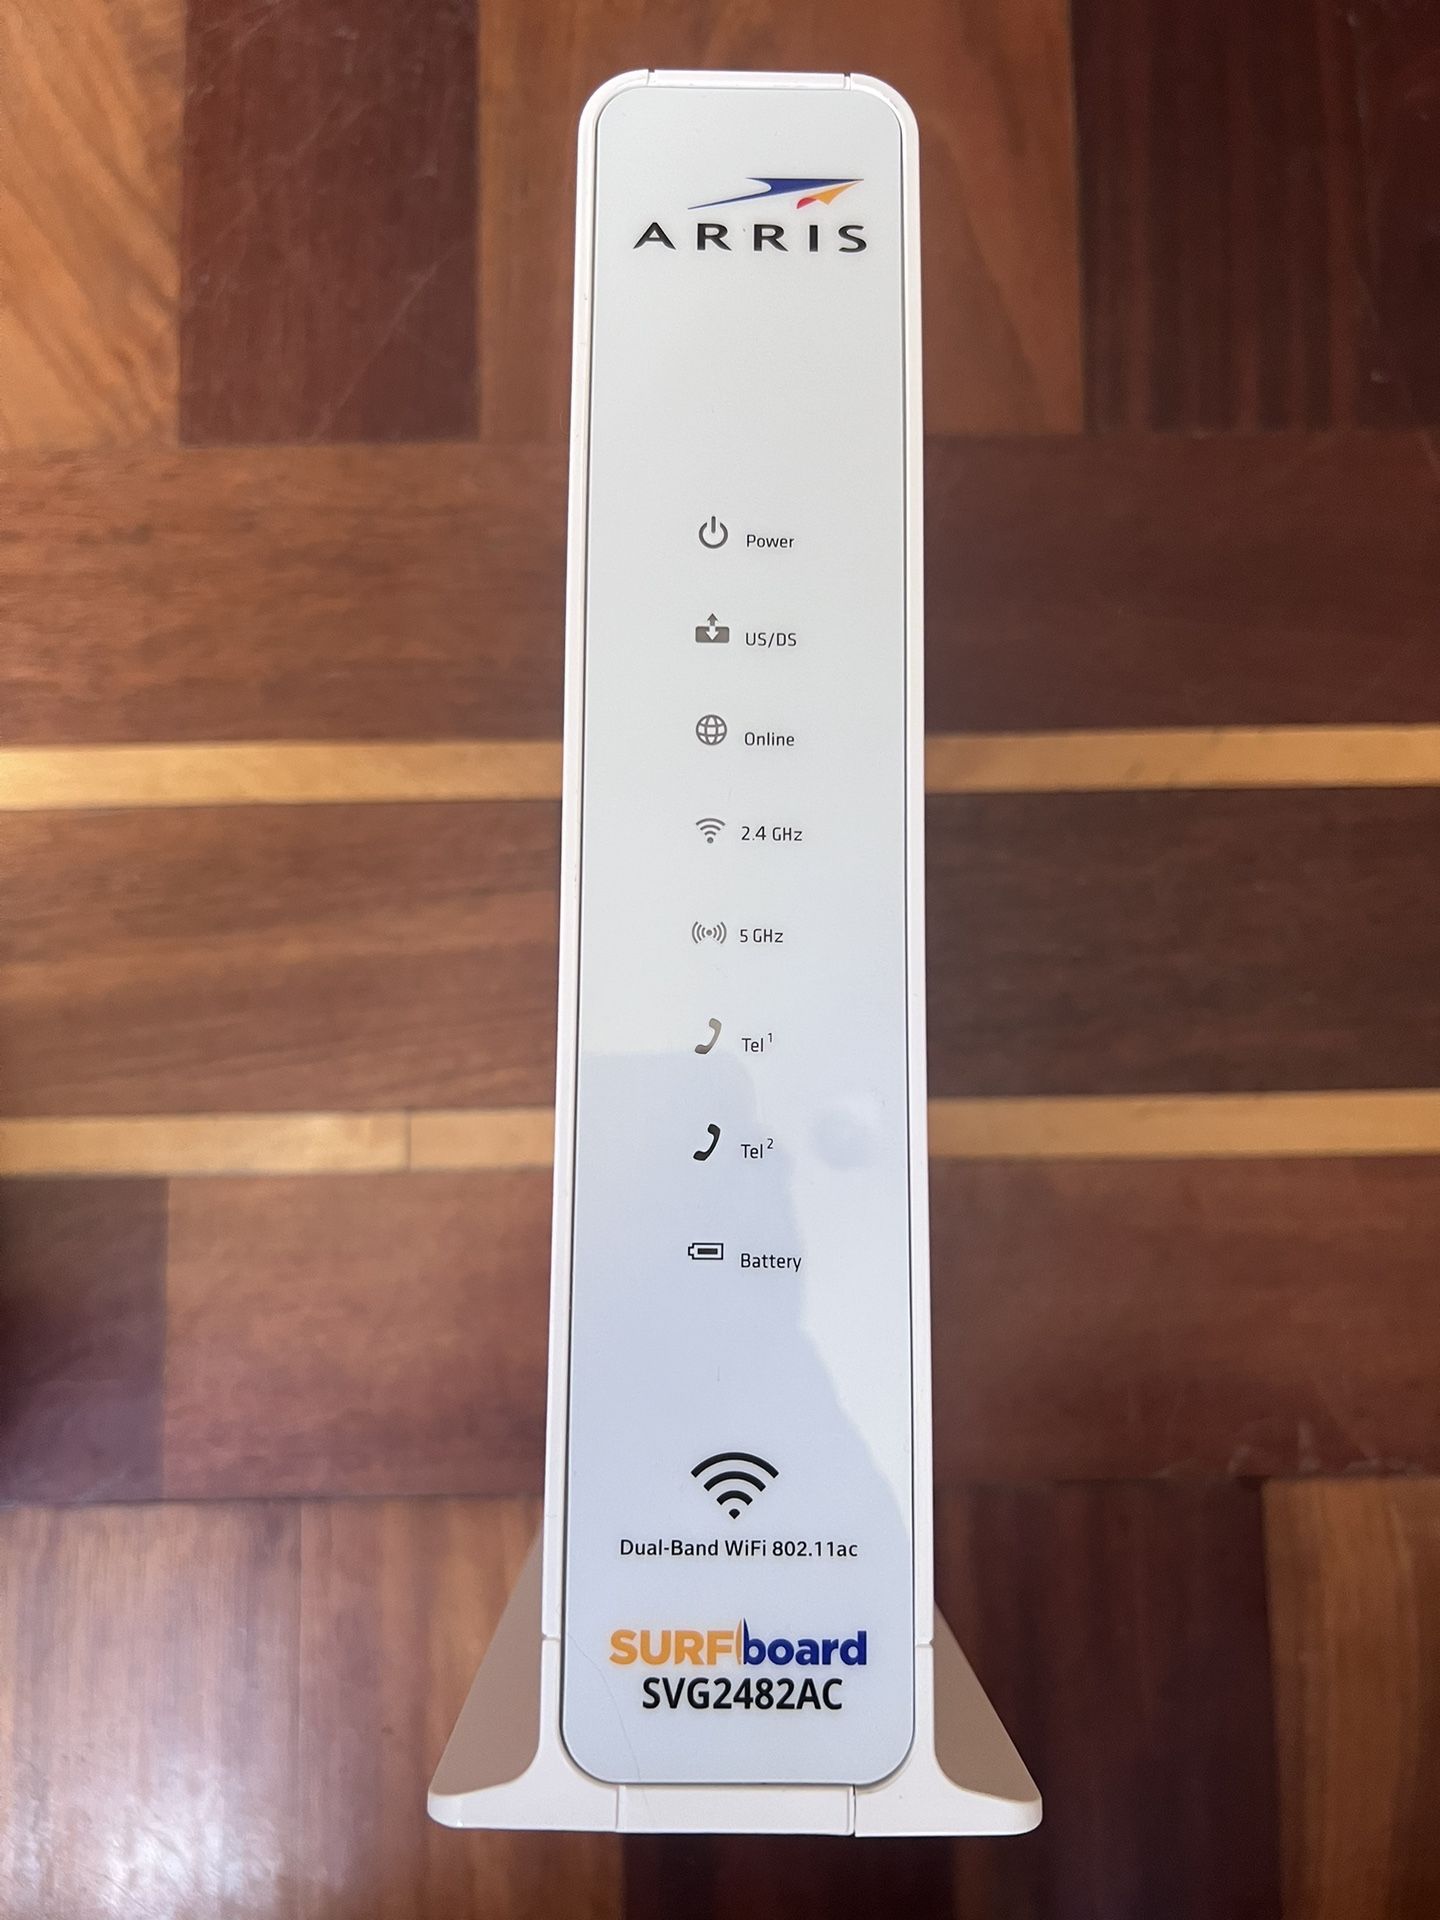 Cable Modem / Wifi Router / Xfinity Internet- Voice